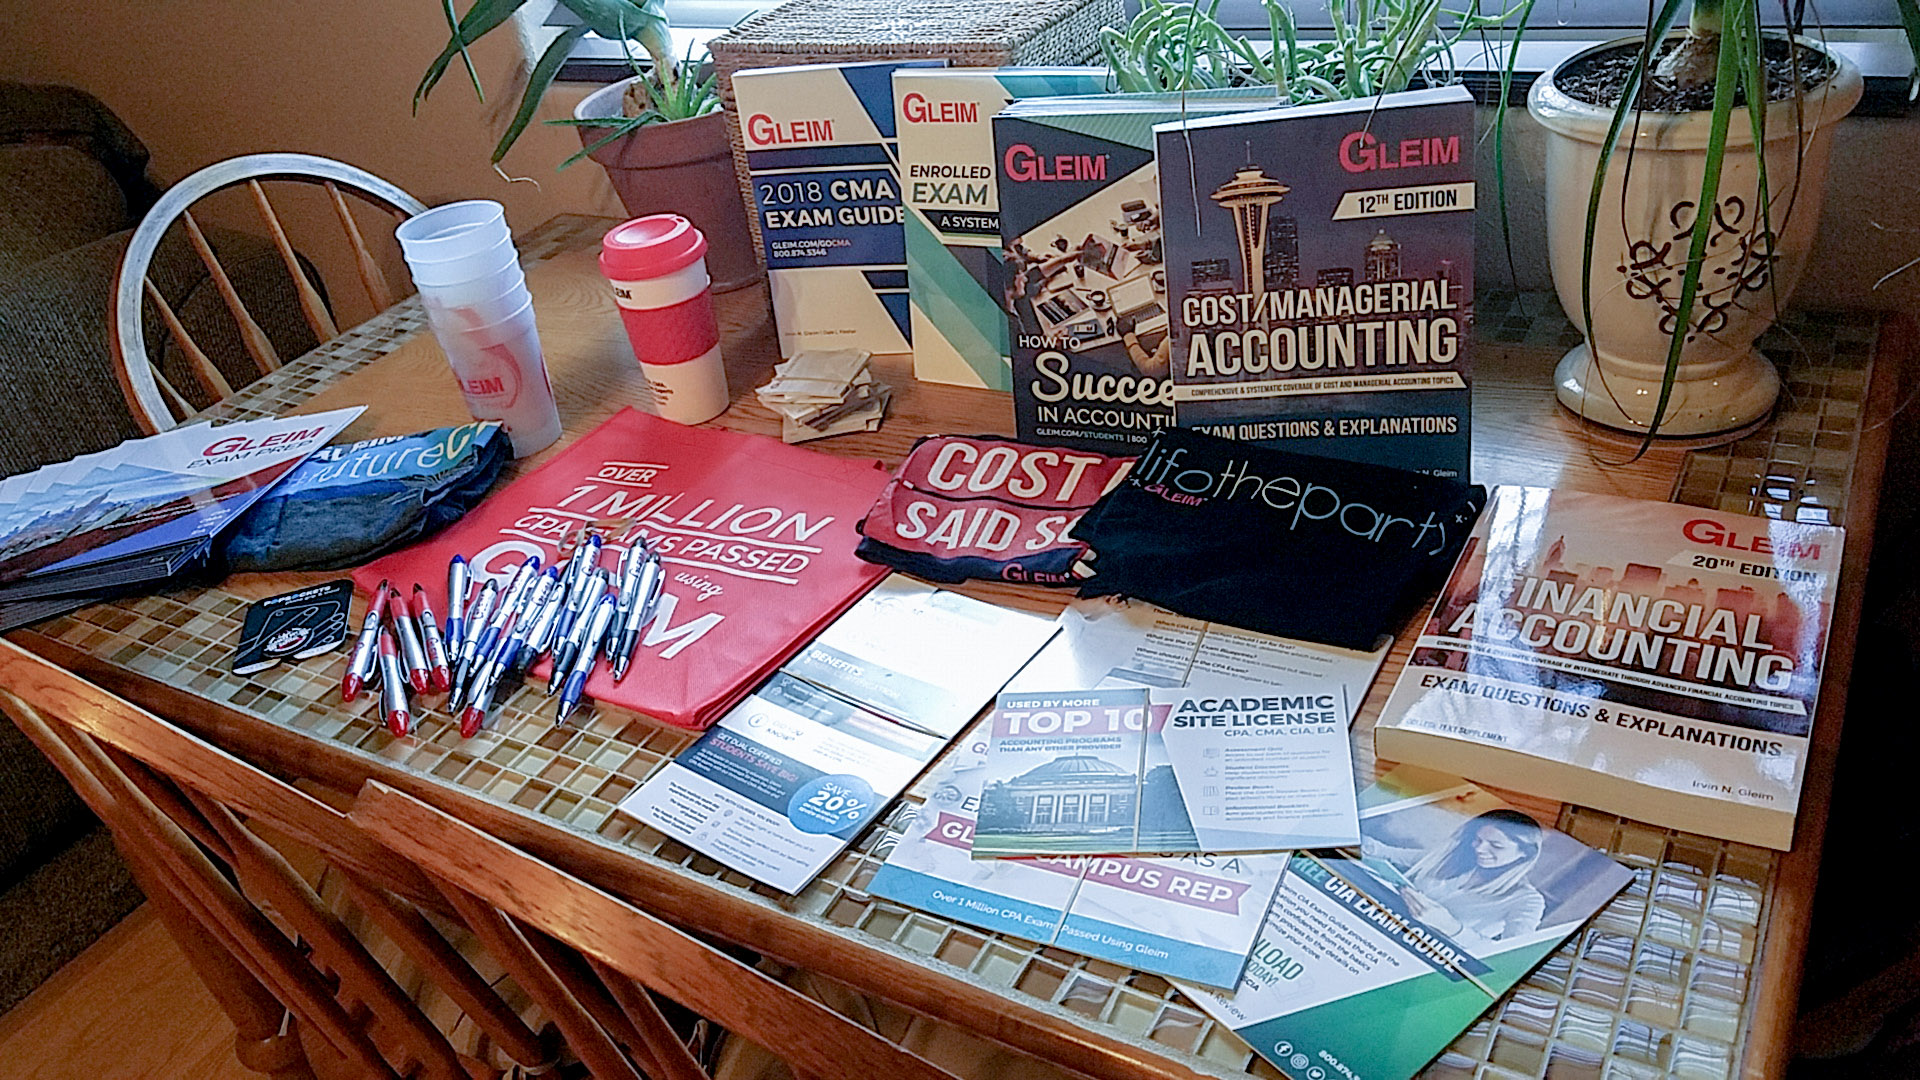 Tabletop filled with Campus Rep materials.